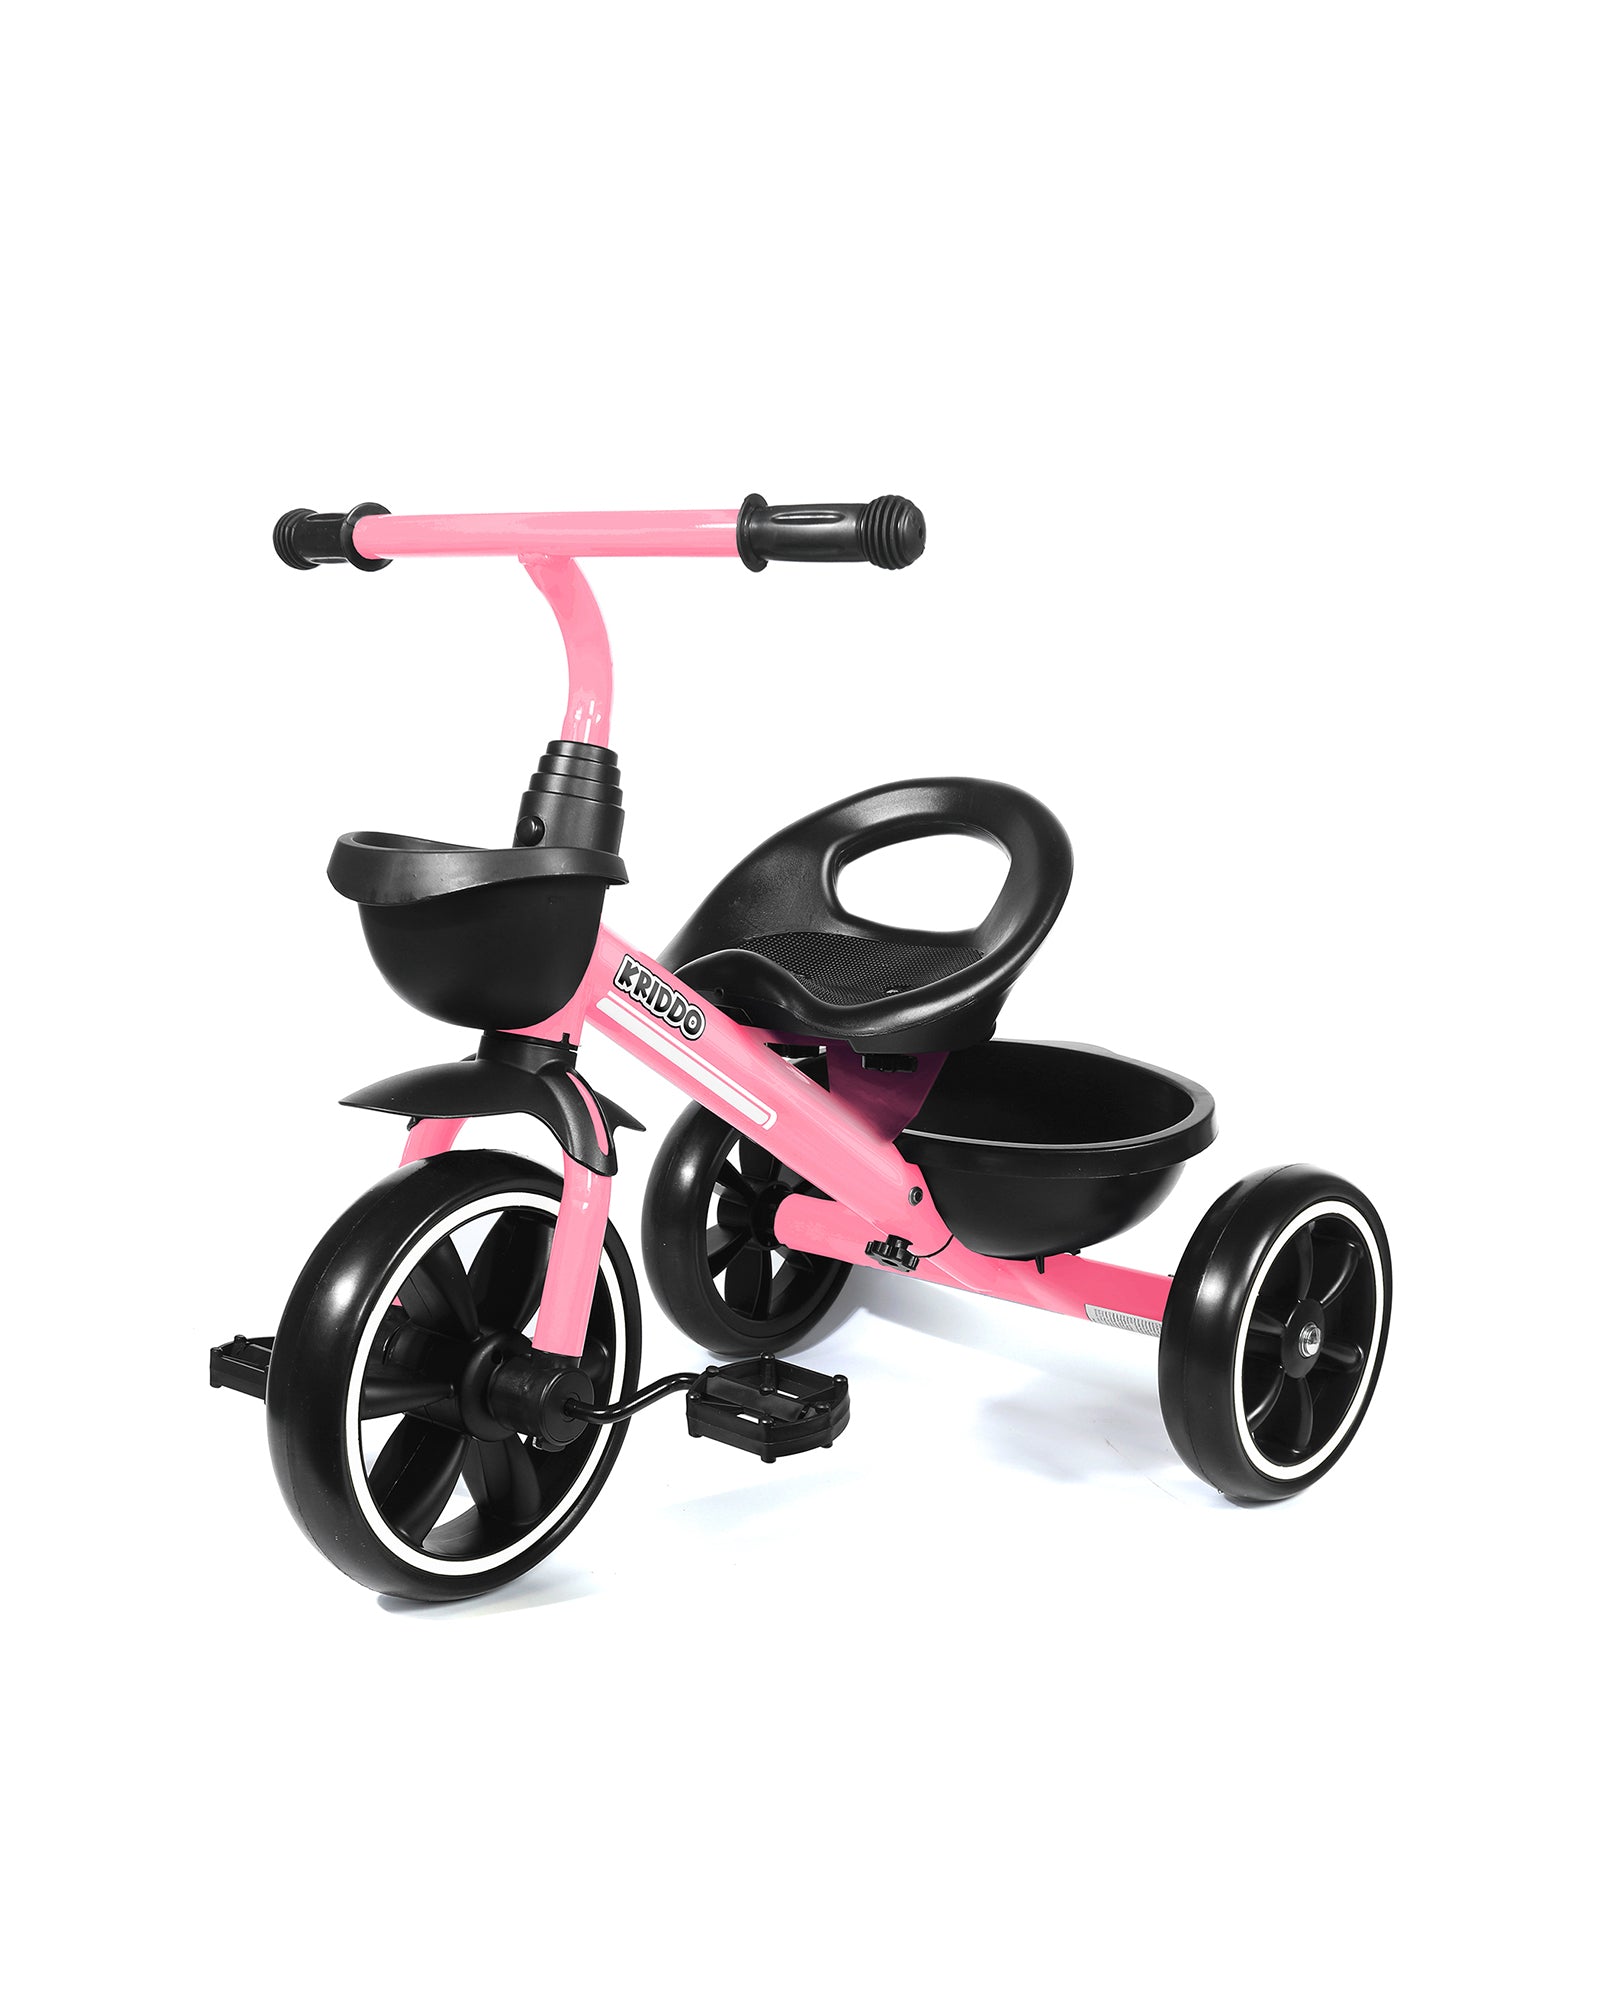 KRIDDO Kids Tricycles for 2-5 Years, Gift Toddler Tricycles for 2-5 Year Olds, Easy Assembly, Pink